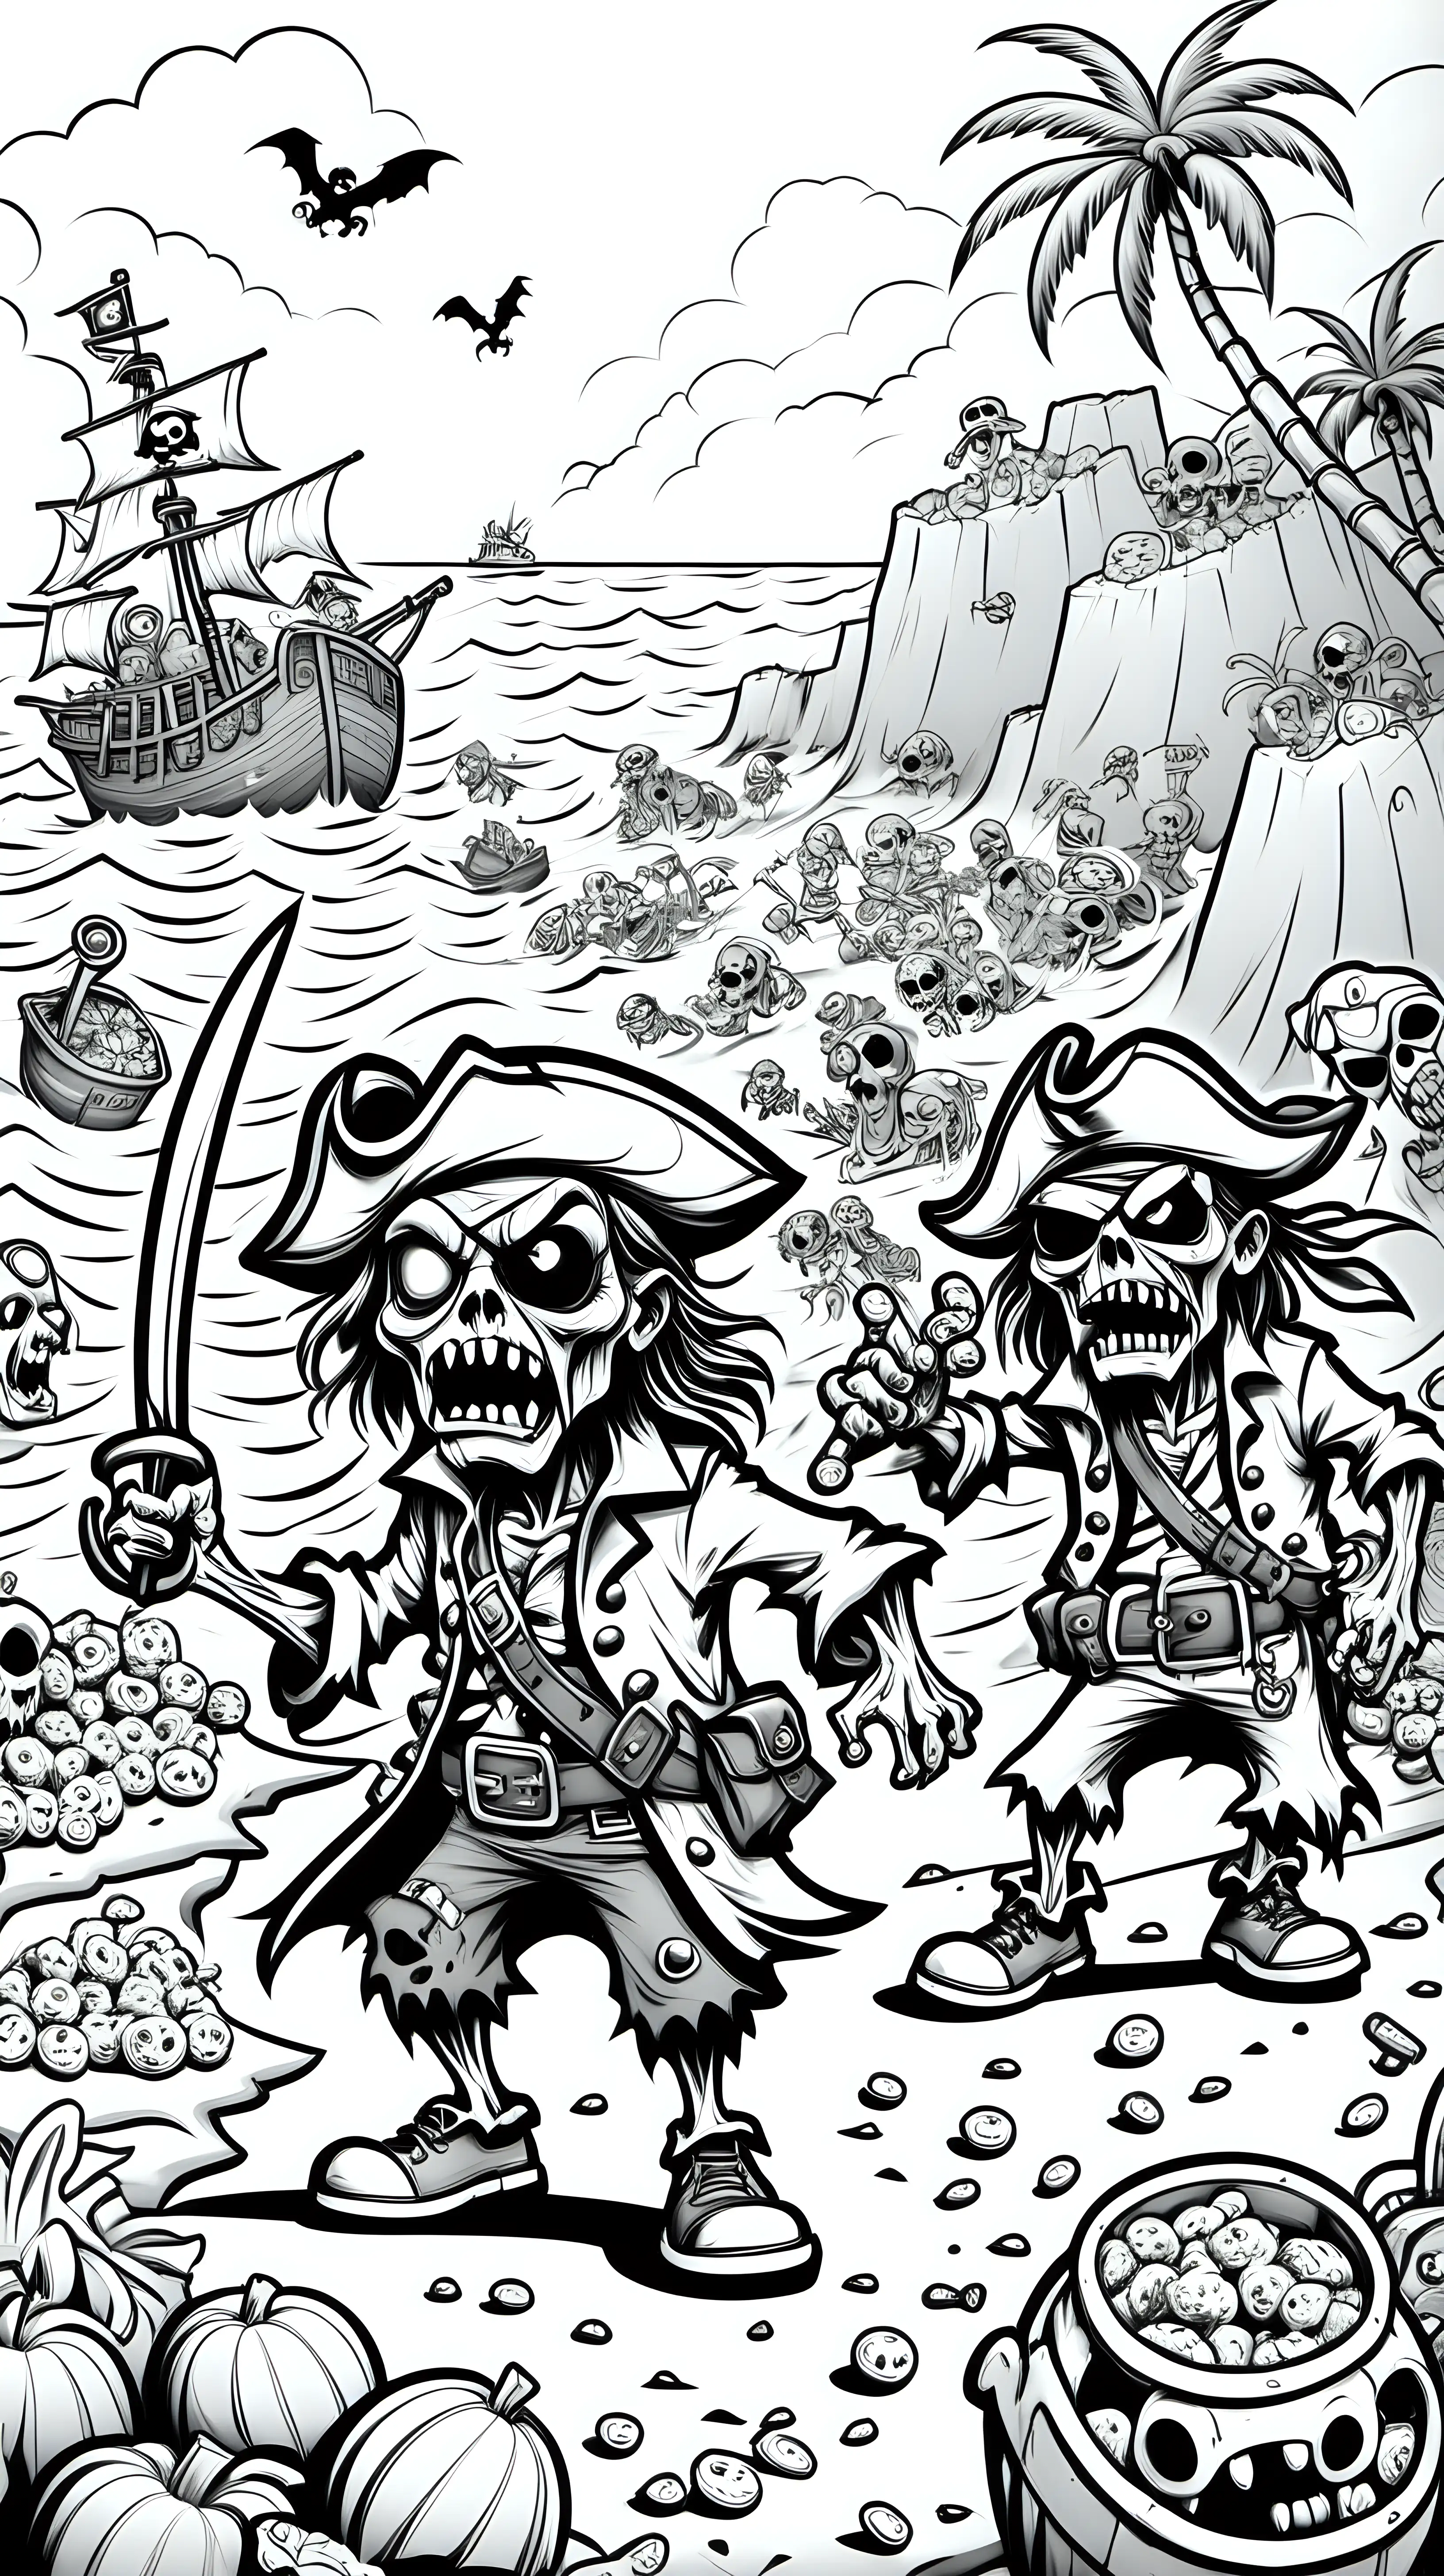 Cartoon Cute Funny Zombie Pirates Hunting for Candy Treasure on Epic Island Background